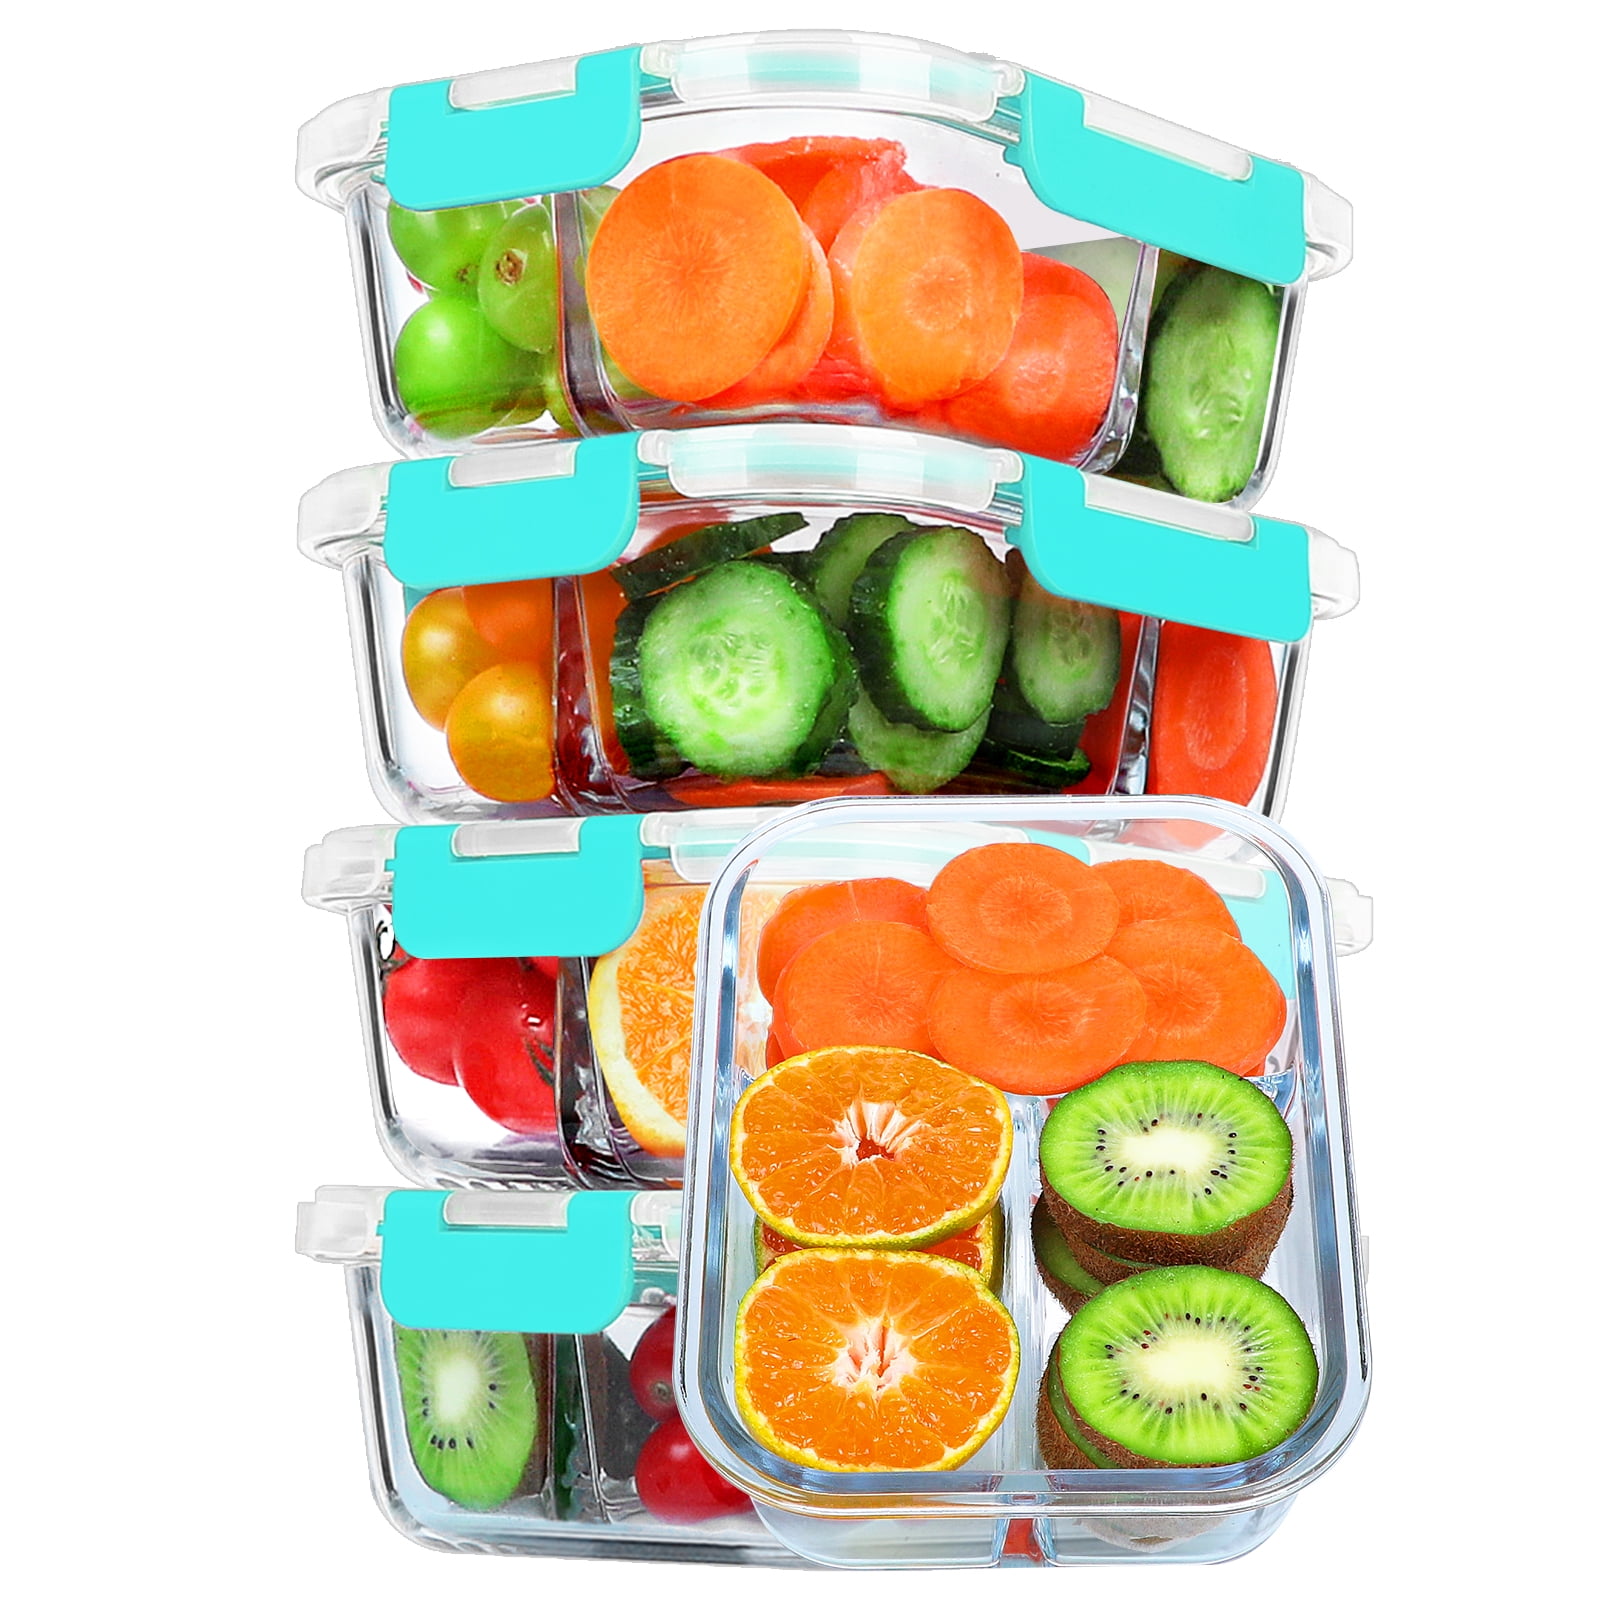 5-Pack, 36 Oz]Glass Meal Prep Containers 3 Compartment with Lids